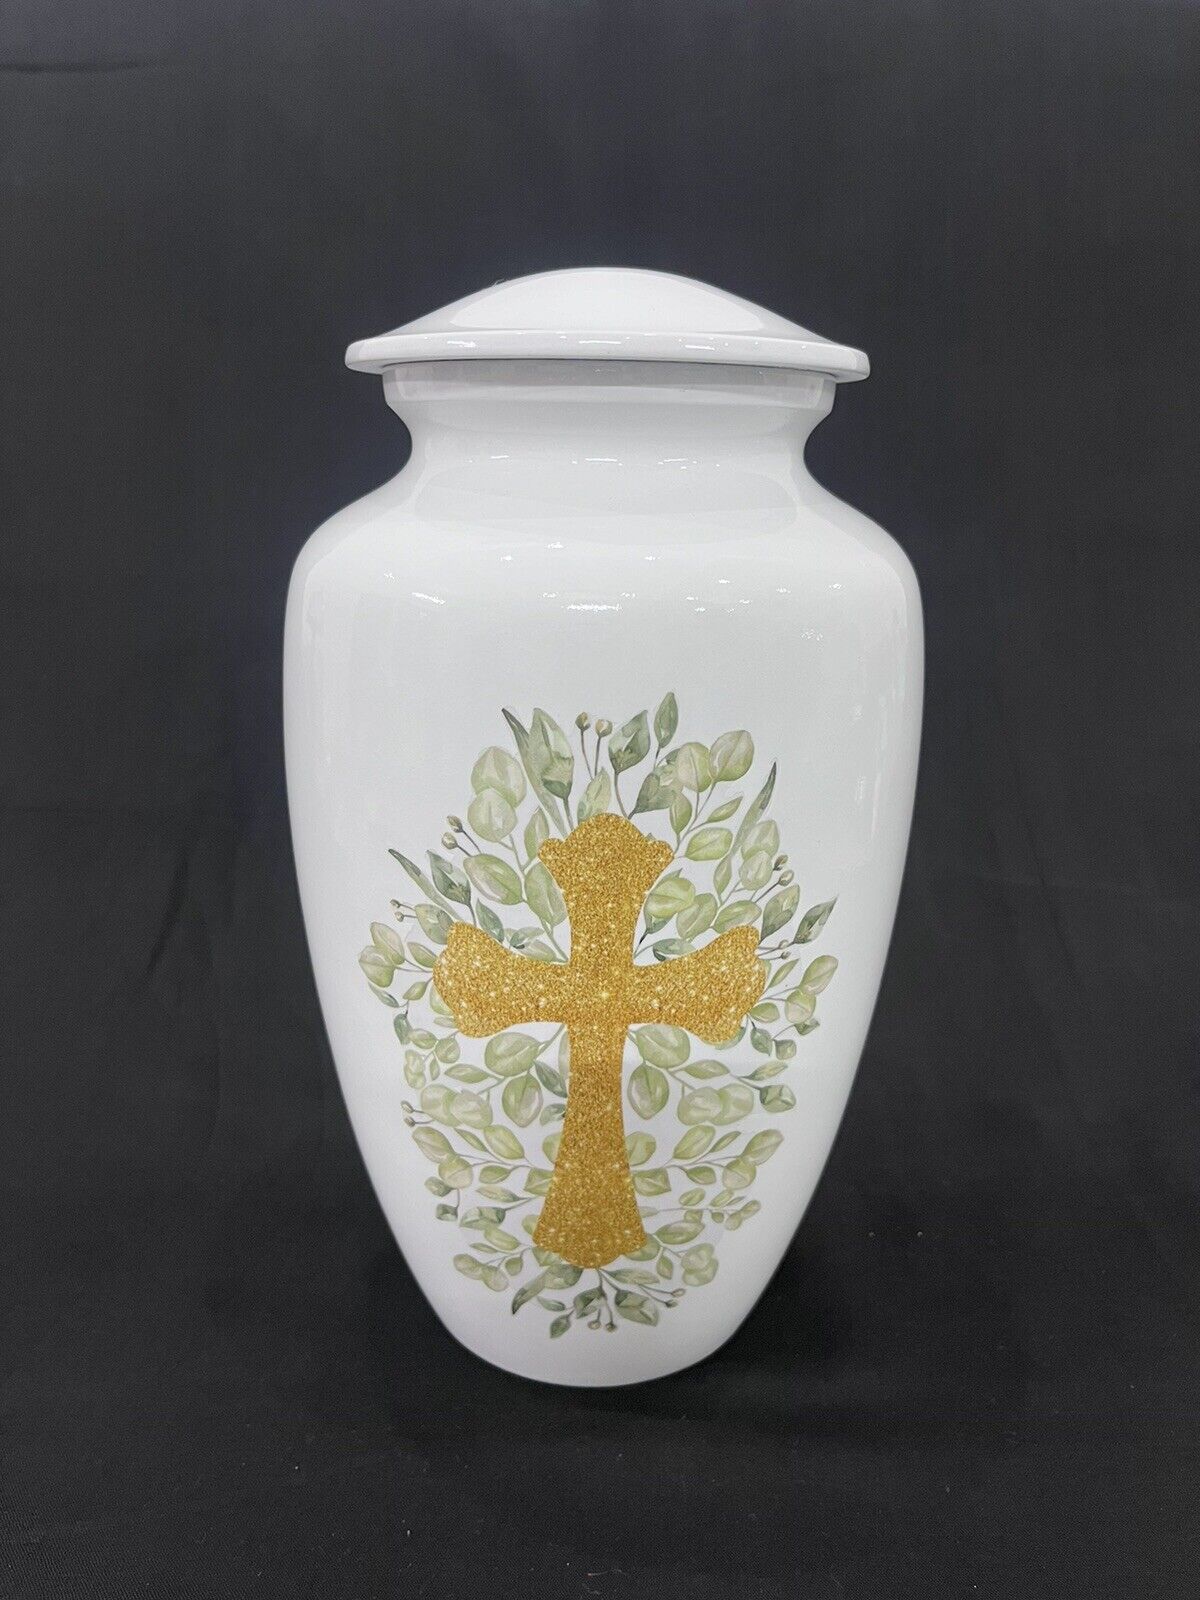 Crosses Style Cremation Urns for Human Ashes Adult Memorial 200 LBs Velvet Bag